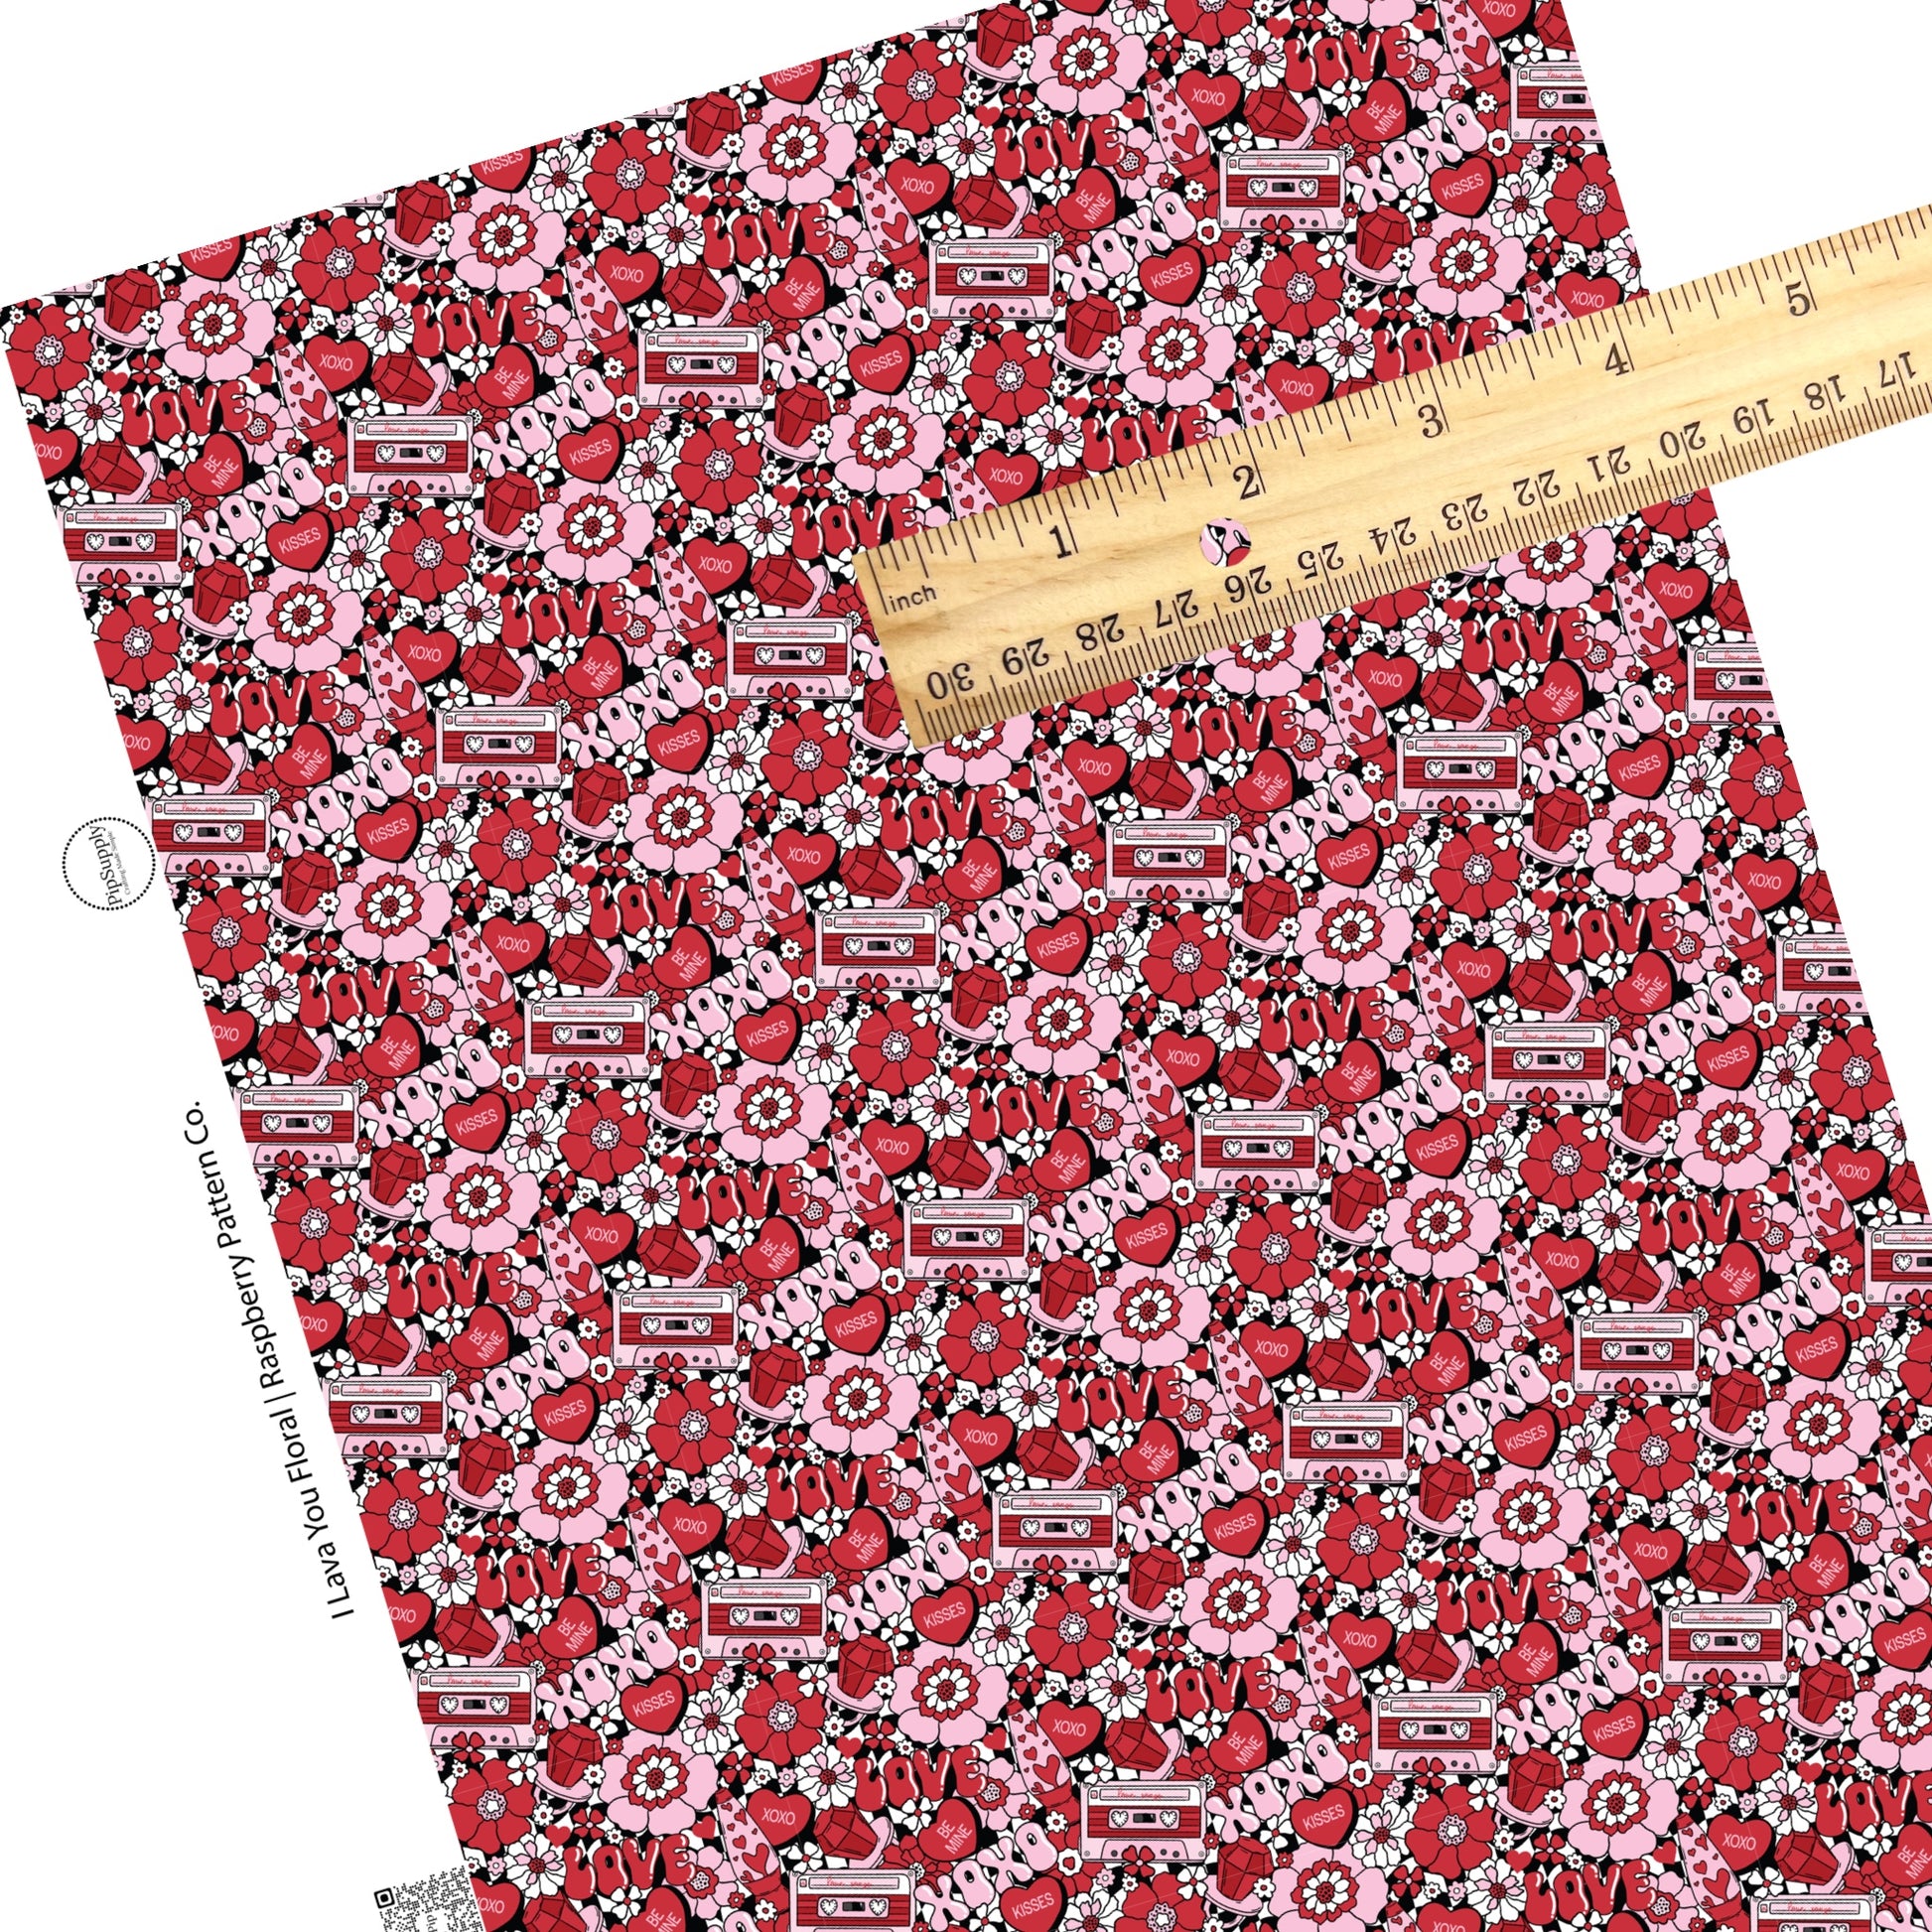 These Valentine's pattern themed faux leather sheets contain the following design elements: cherry ring pops, conversation heart candy, flowers, and cassette tapes on white and black checker pattern. Our CPSIA compliant faux leather sheets or rolls can be used for all types of crafting projects.